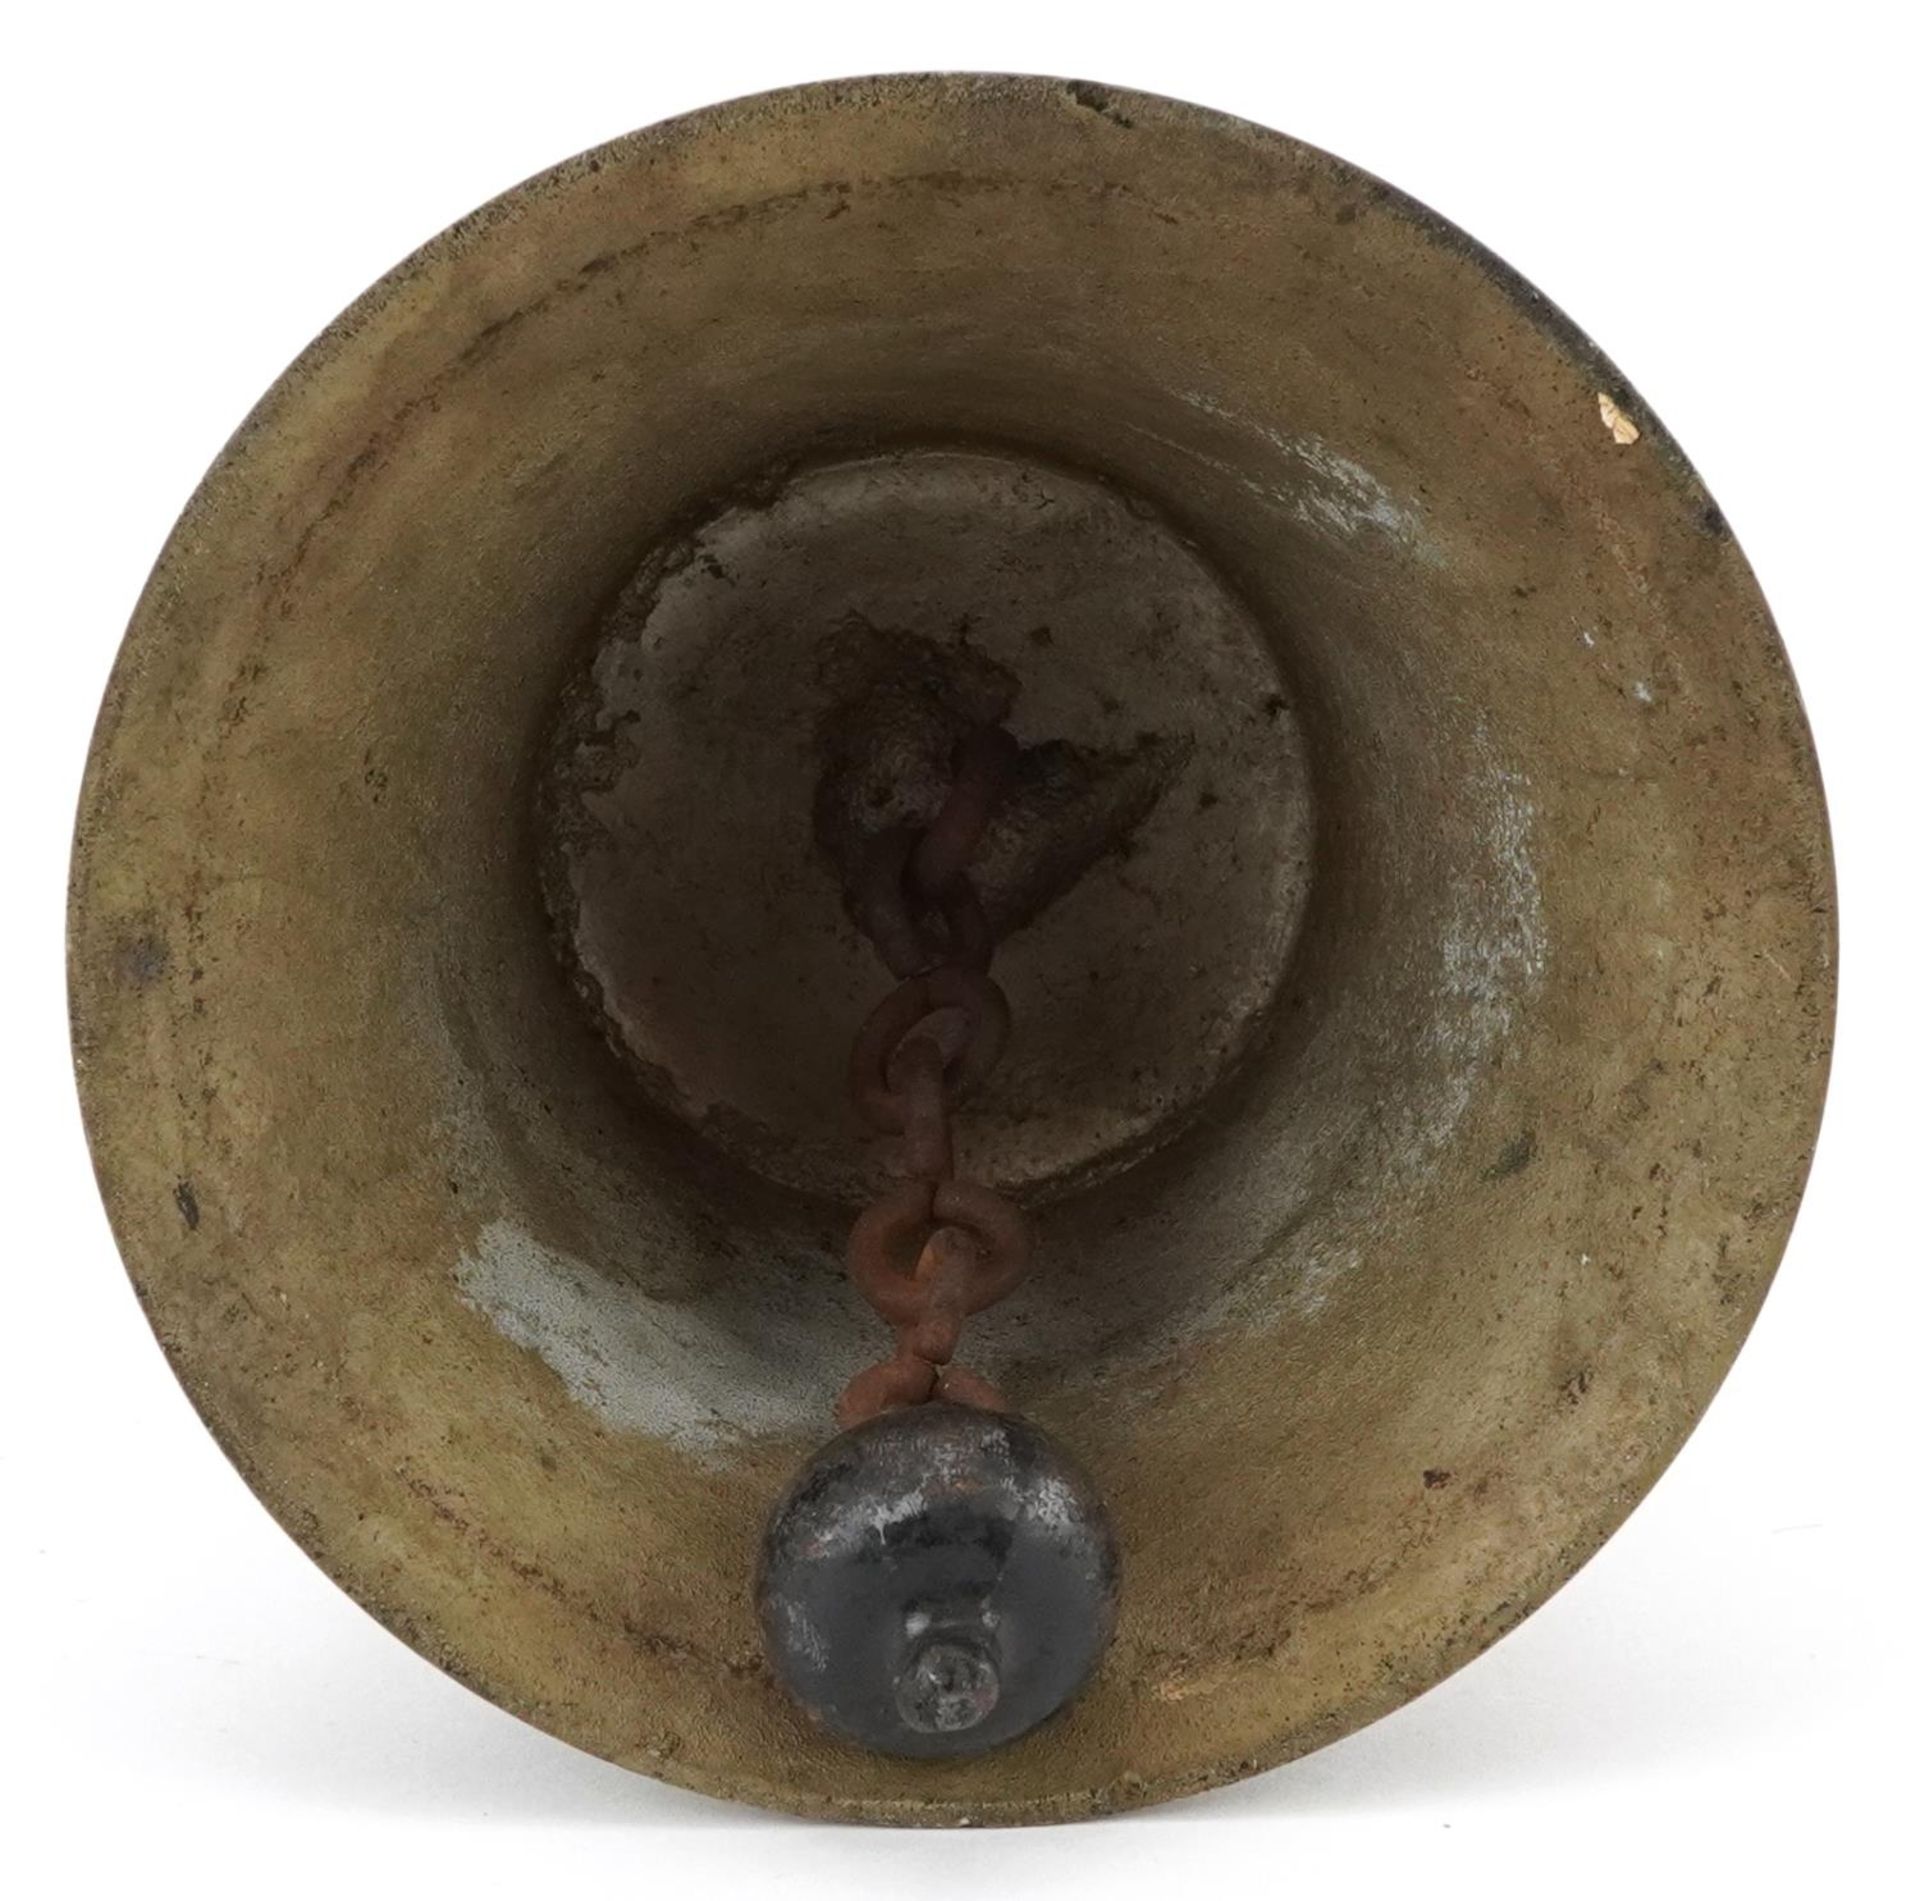 British military ARP Civil Defence bell with turned wooden handle, 26.5cm high - Image 5 of 5